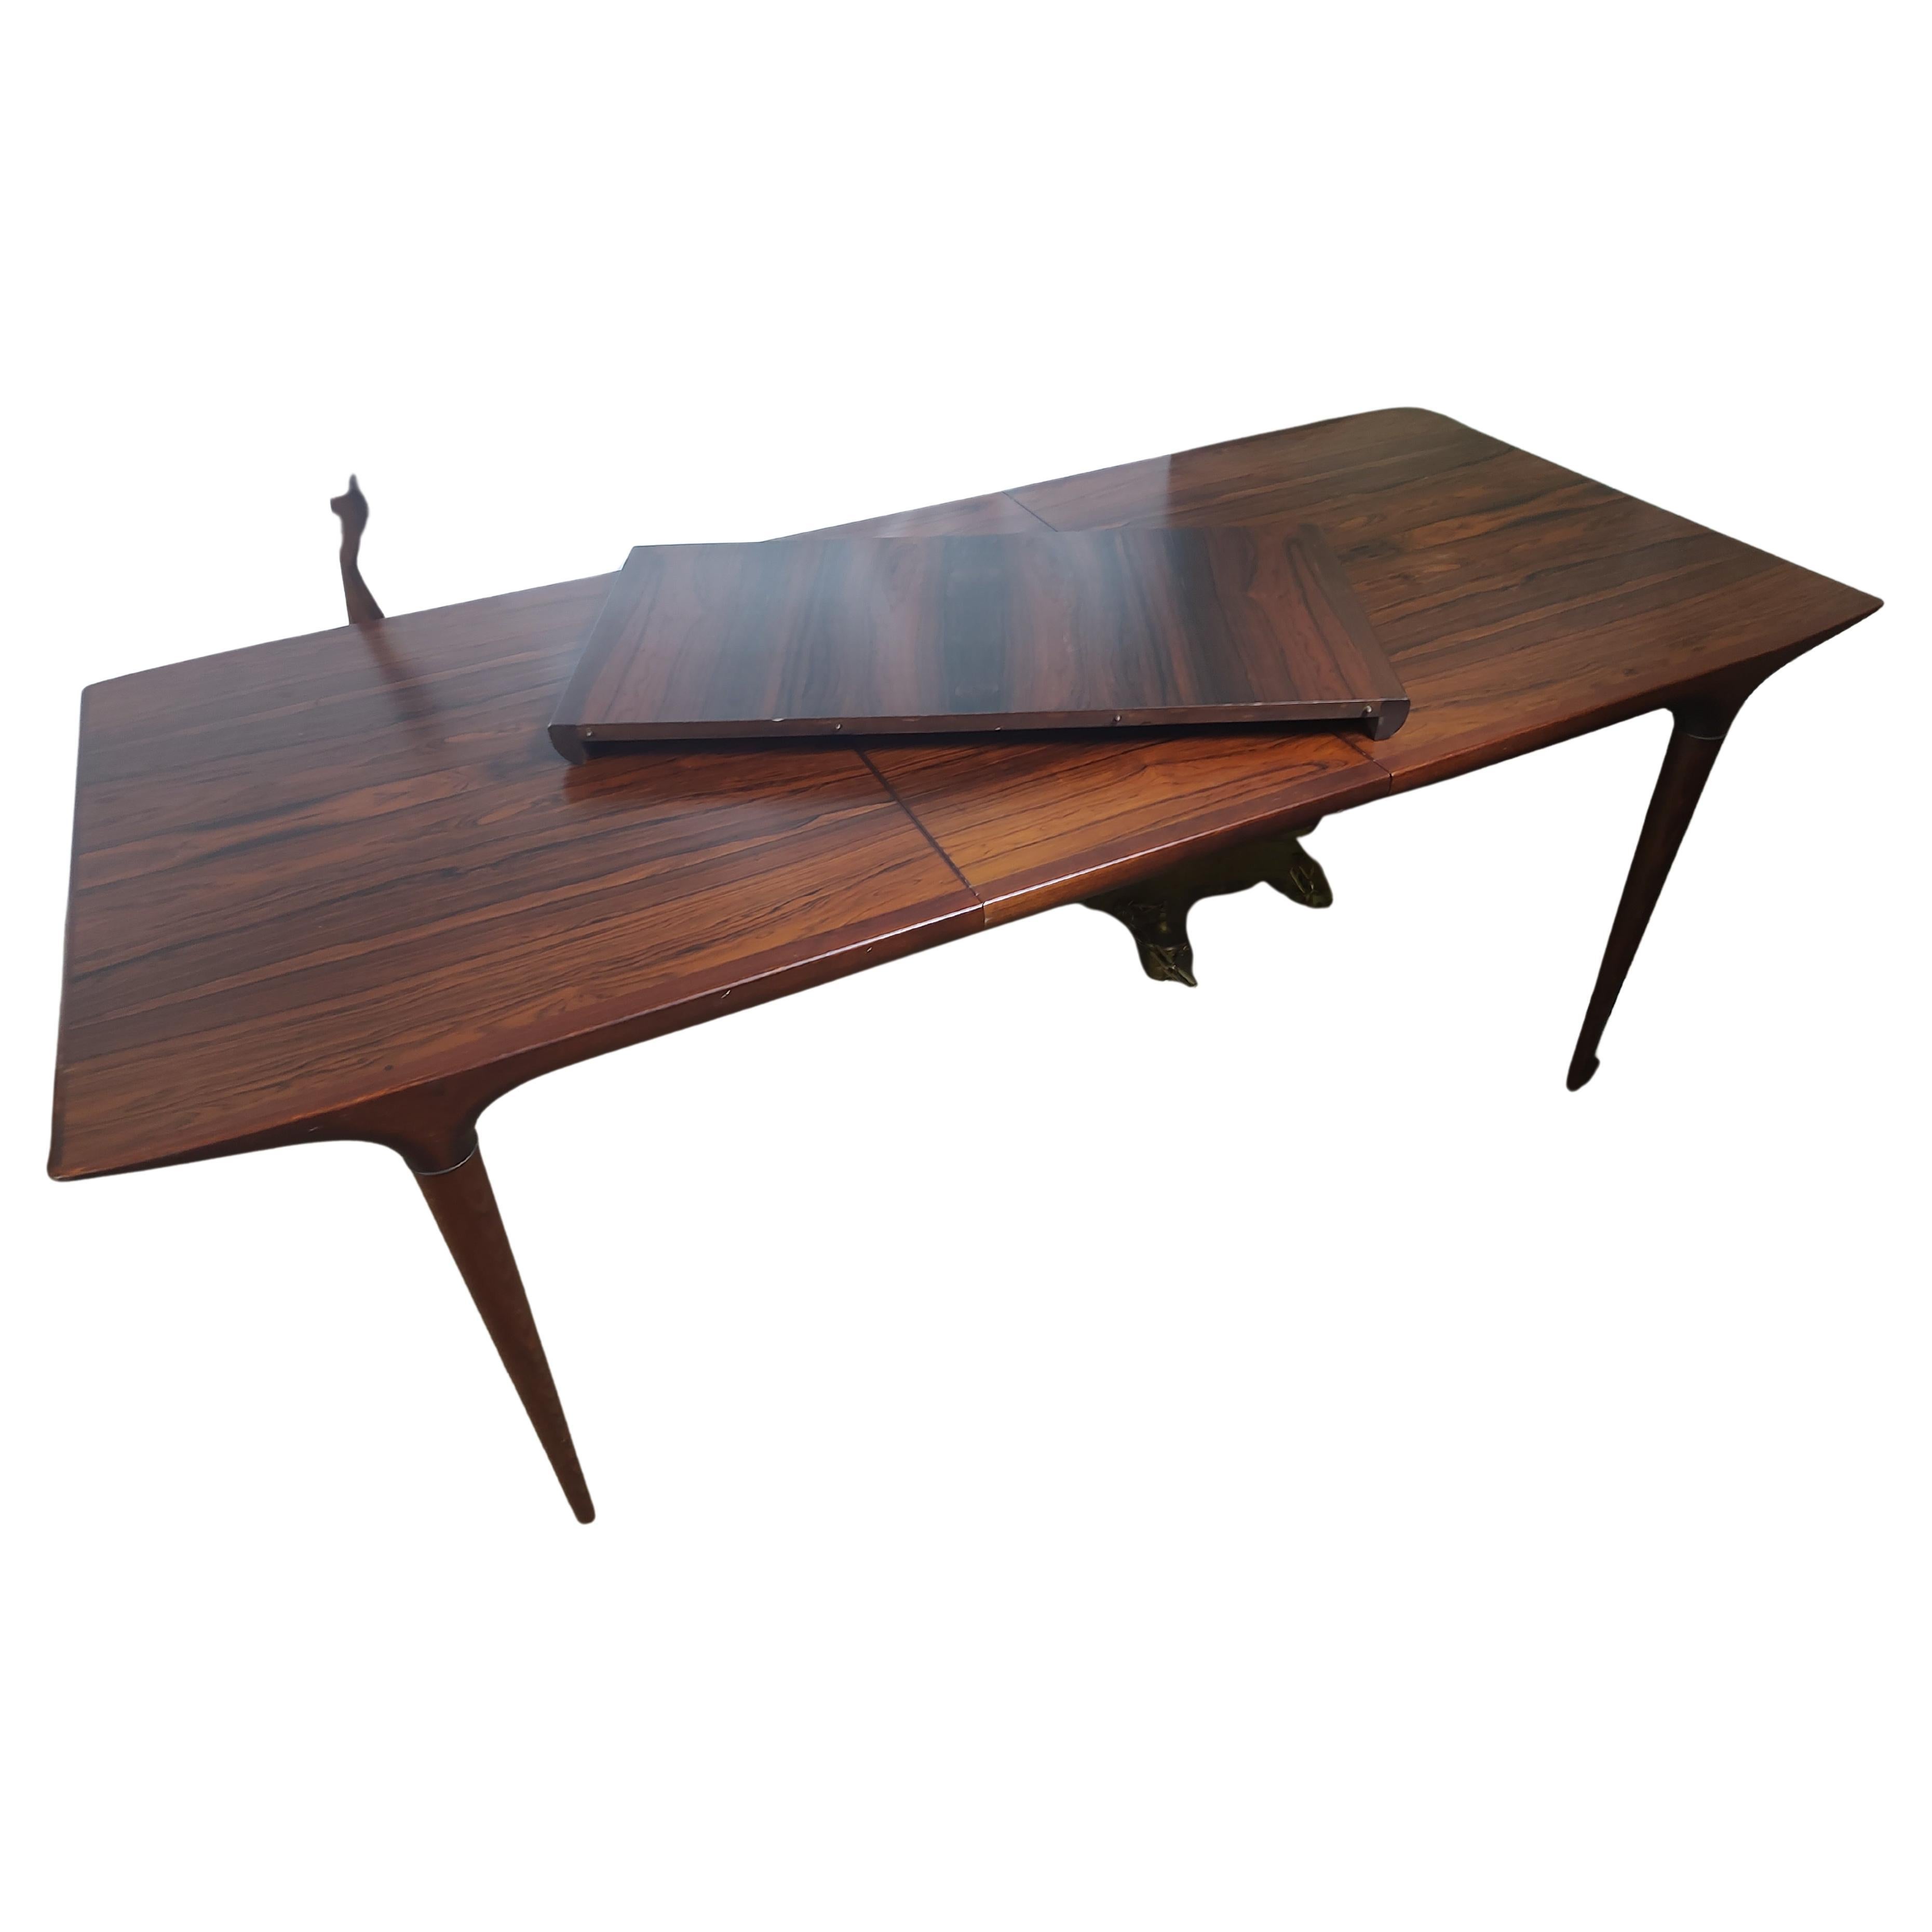 Hand-Crafted Mid Century Modern Rosewood Dining Table 2 Leafs by Seffle Sweden